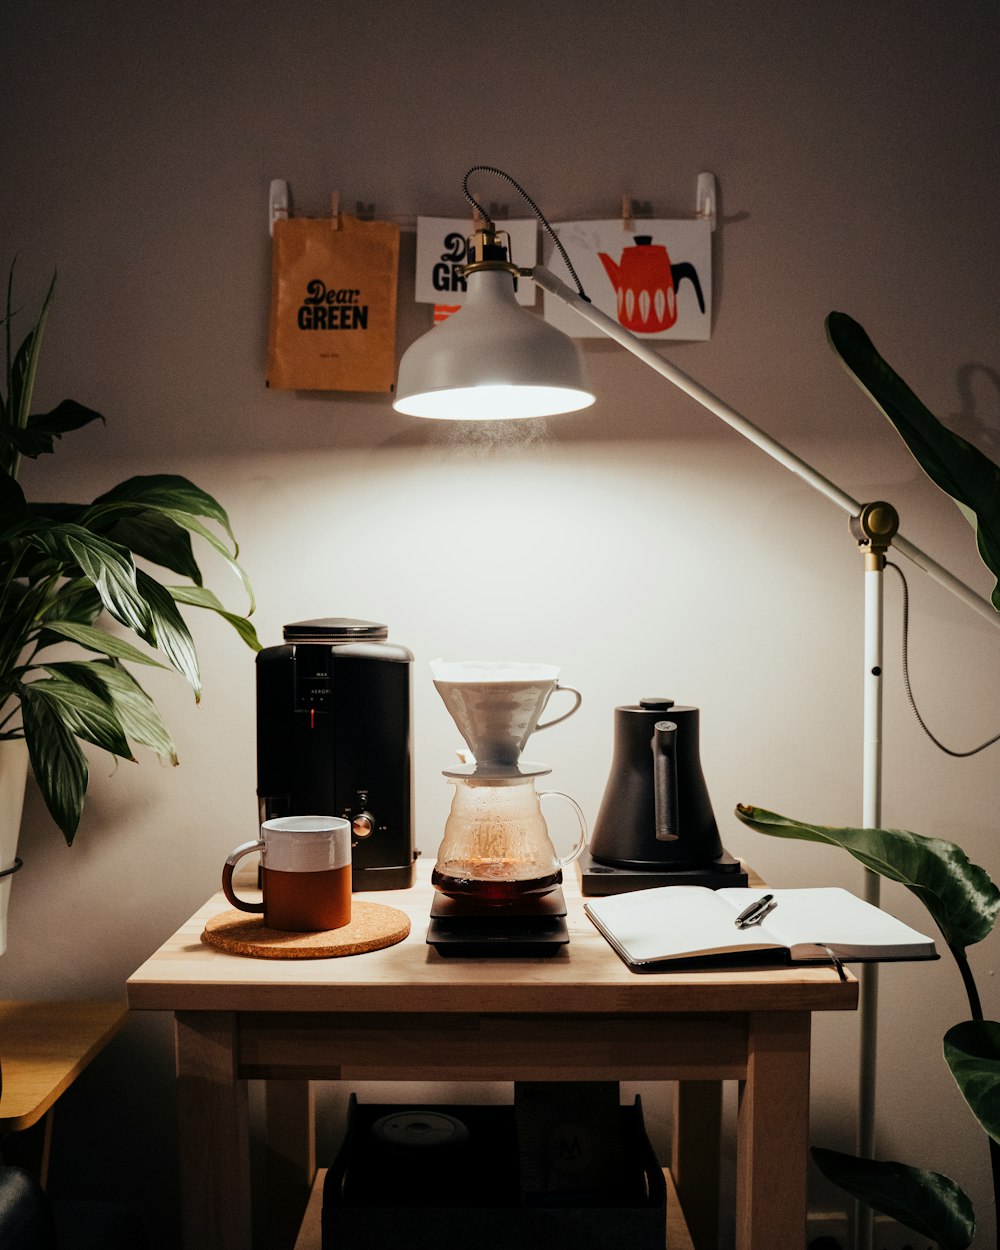 black coffee maker on brown wooden table